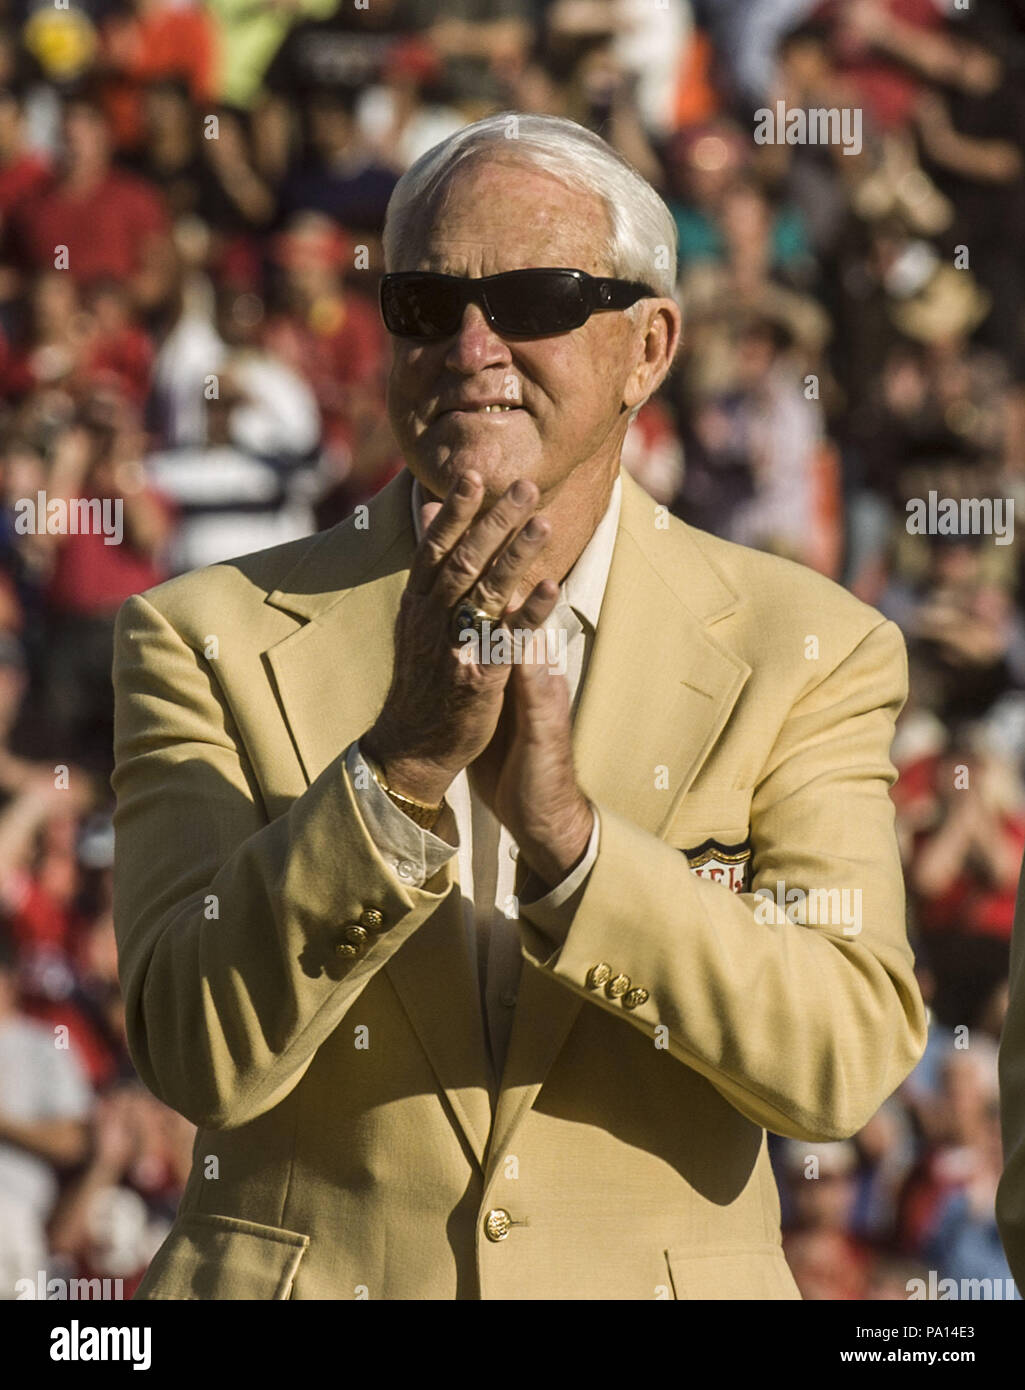 San Francisco, California, USA. 20th Nov, 2005. Former 49ers head coach Bill Walsh watches Steve Young's Football Hall of Fame ring presentation on Sunday, November 20, 2005, in San Francisco, California. The Seahawks defeated the 49ers 27-25. Credit: Al Golub/ZUMA Wire/Alamy Live News Stock Photo